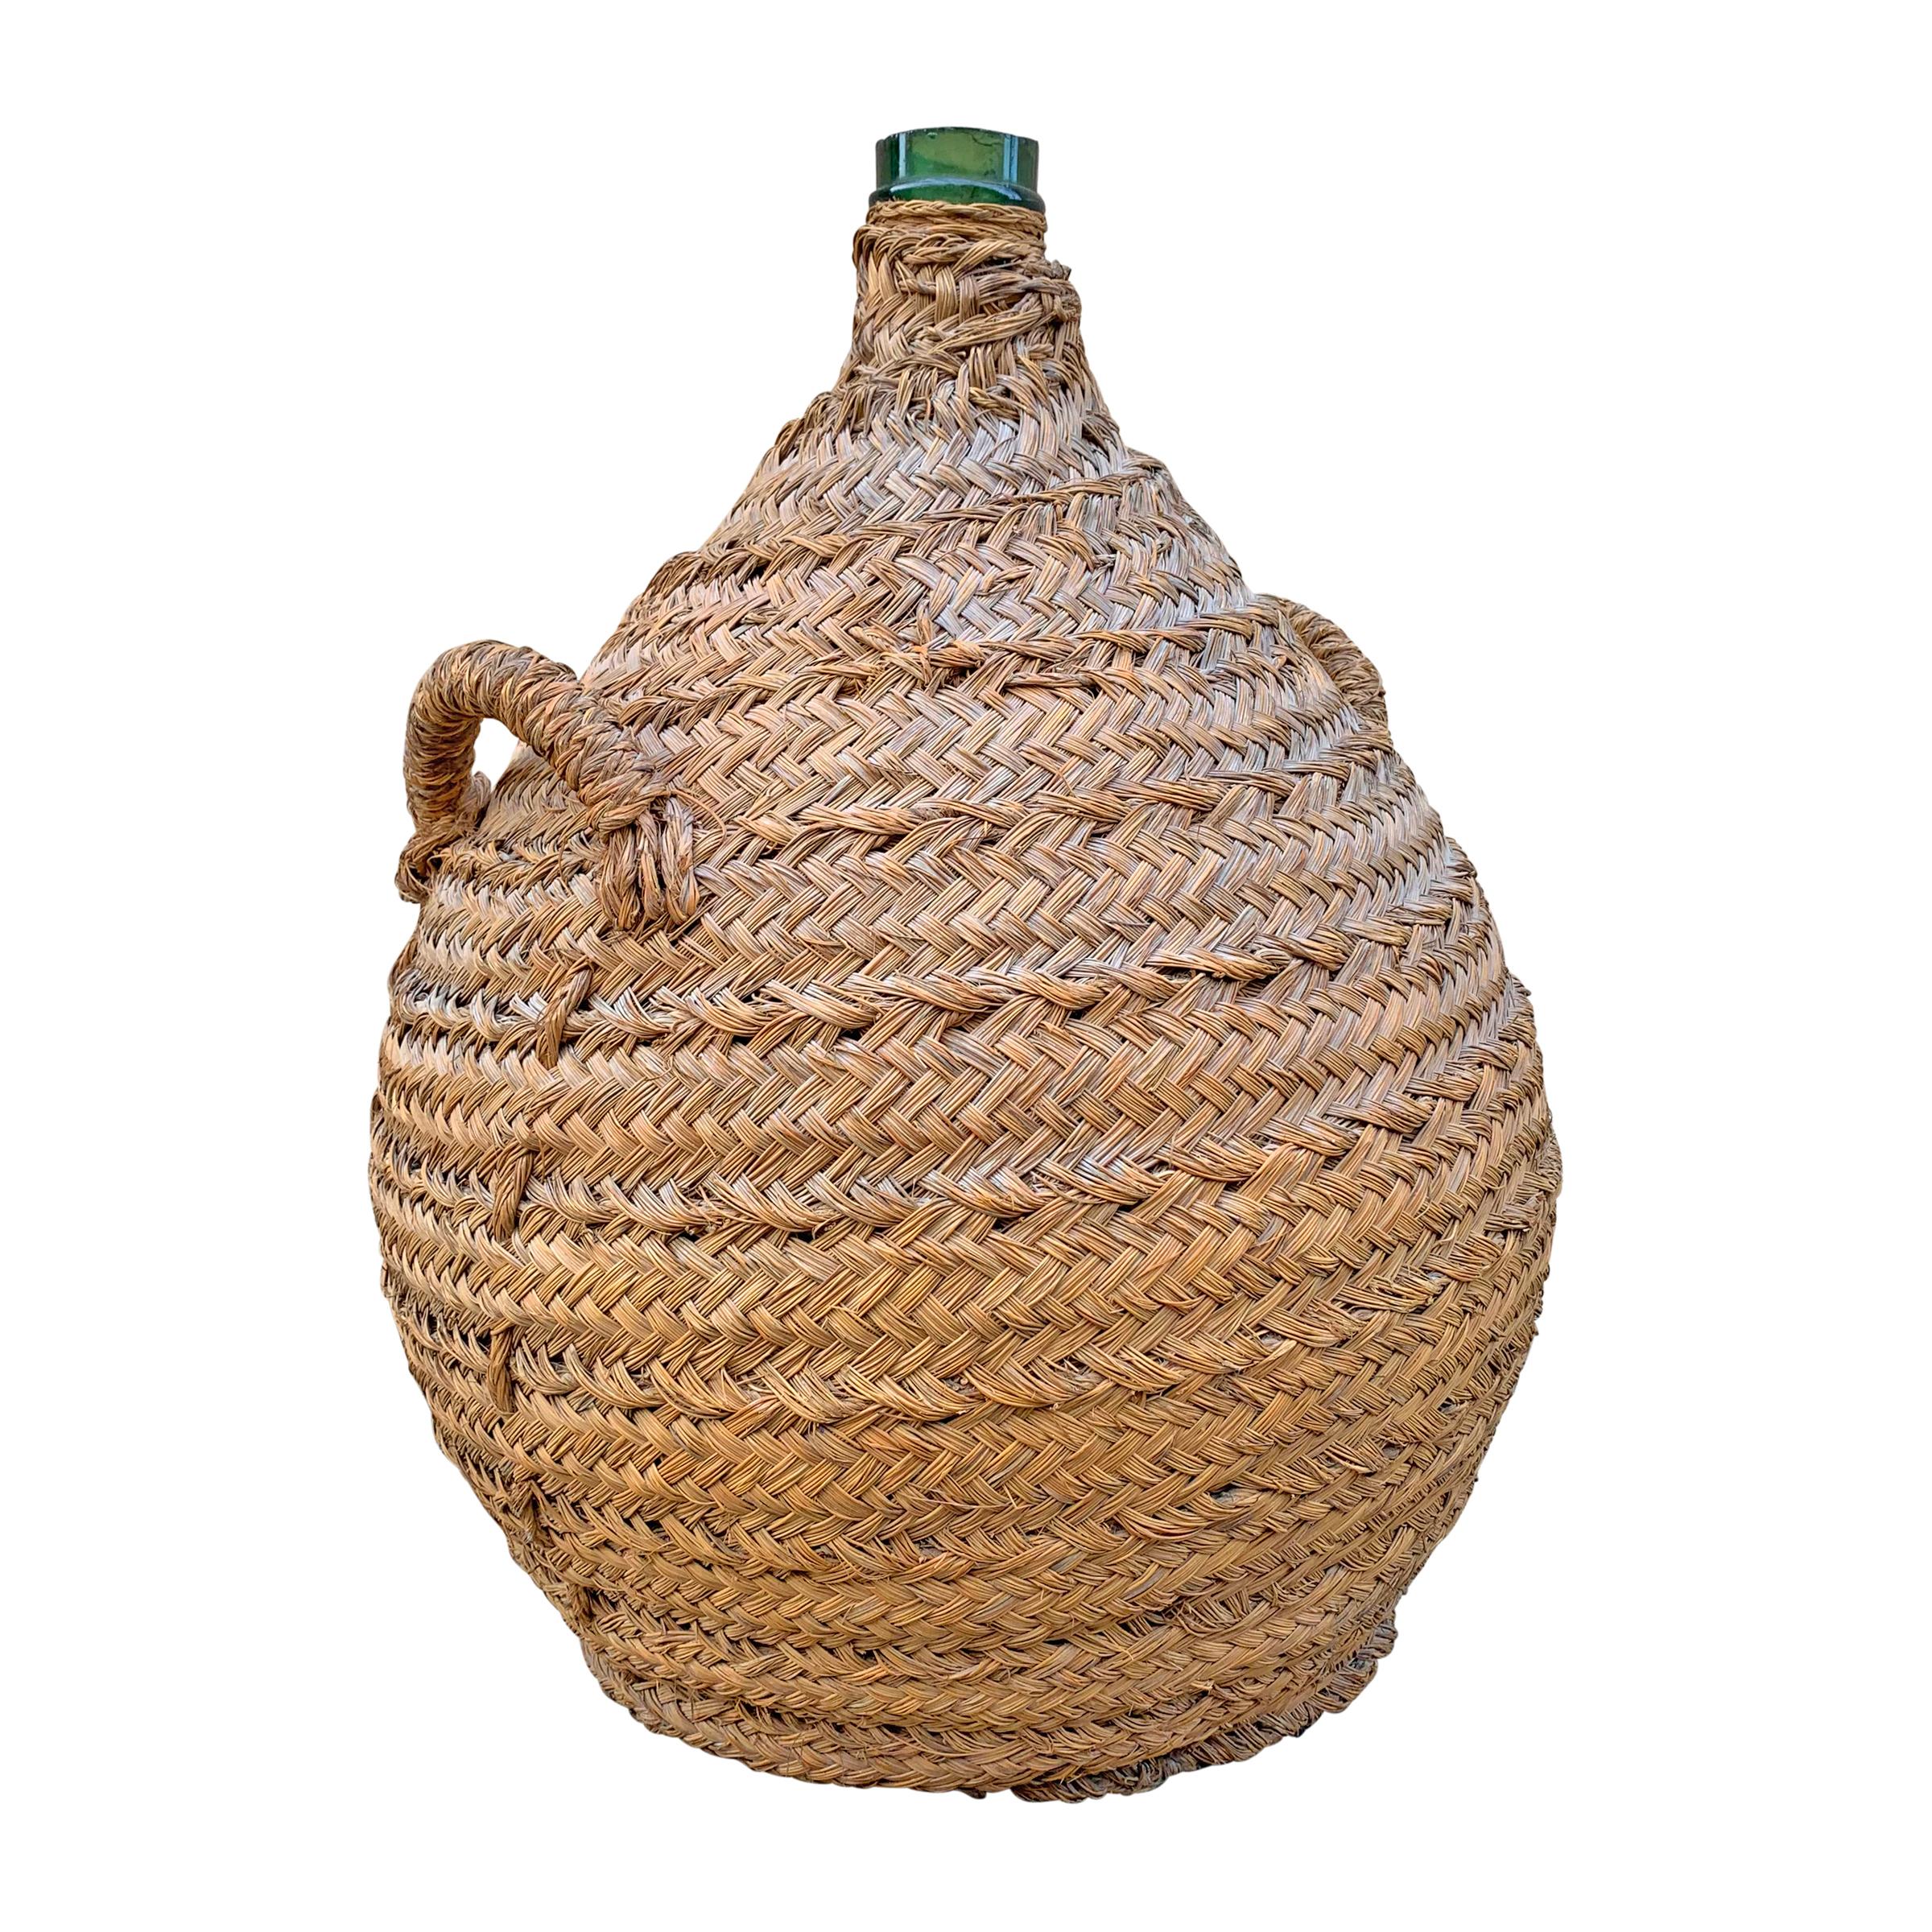 A handsome 19th century Italian hand blown green glass wine jar covered in a handwoven wicker basket to protect from bumps and bruises.